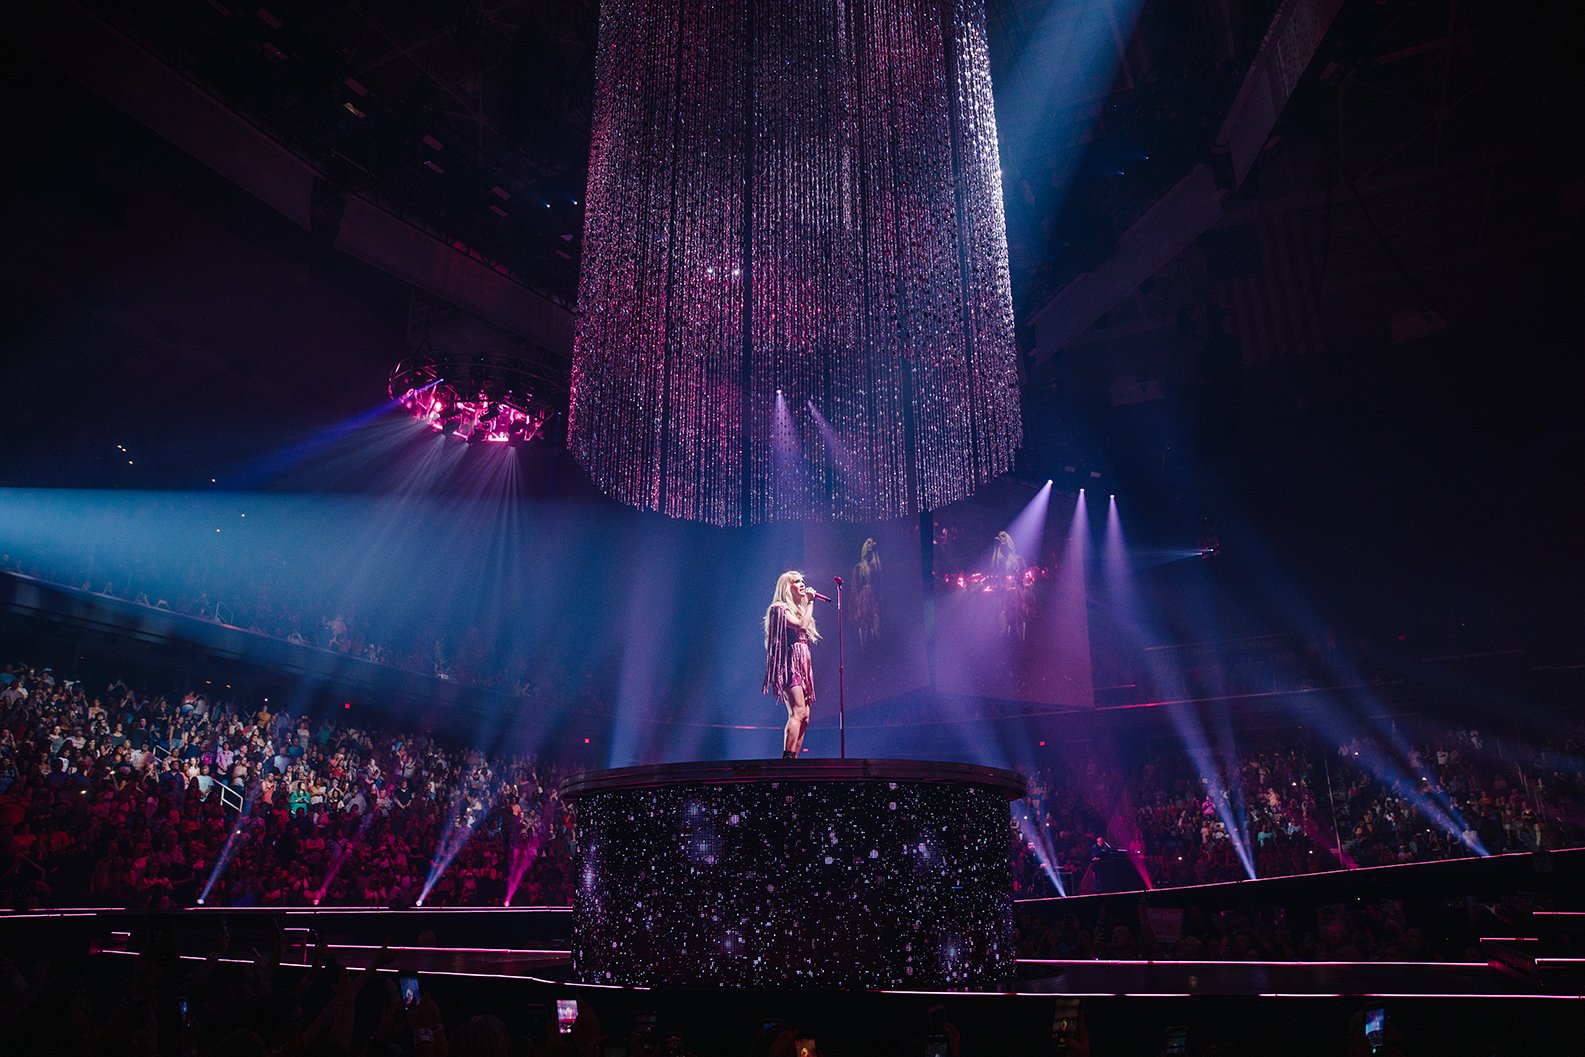 stage design and lighting design for Carrie Underwood's Cry Pretty 360 tour